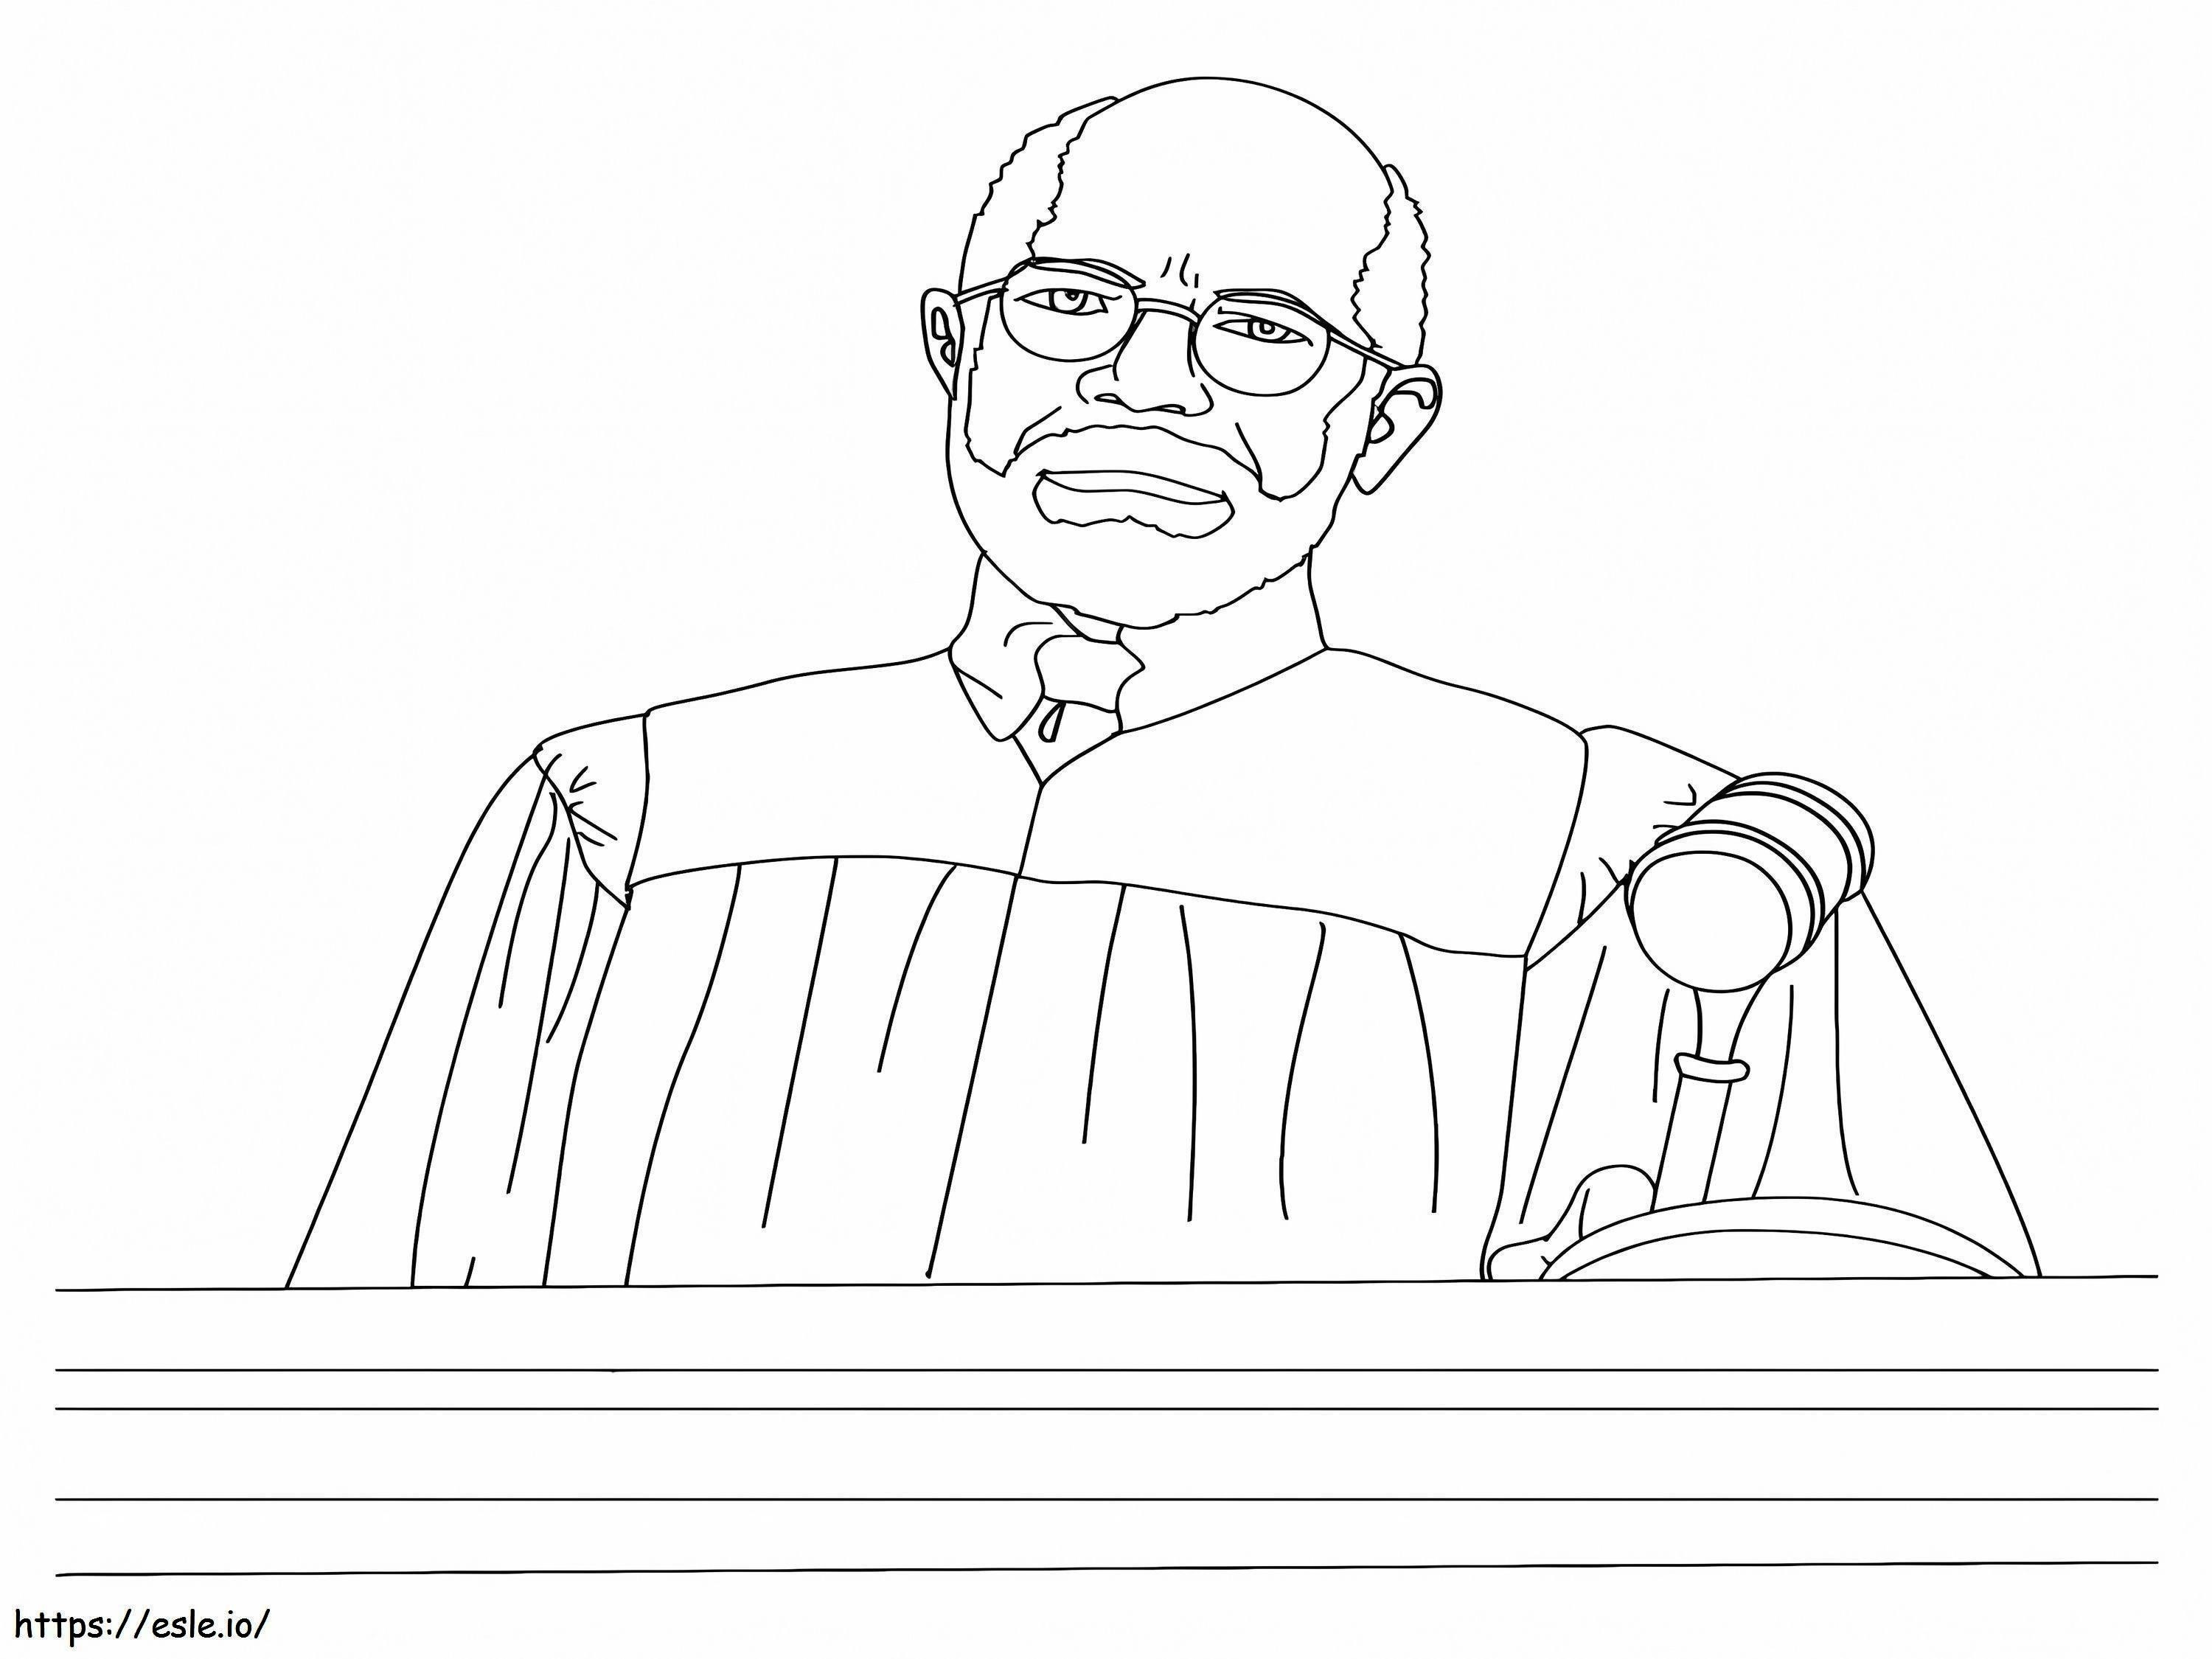 Judge 7 coloring page